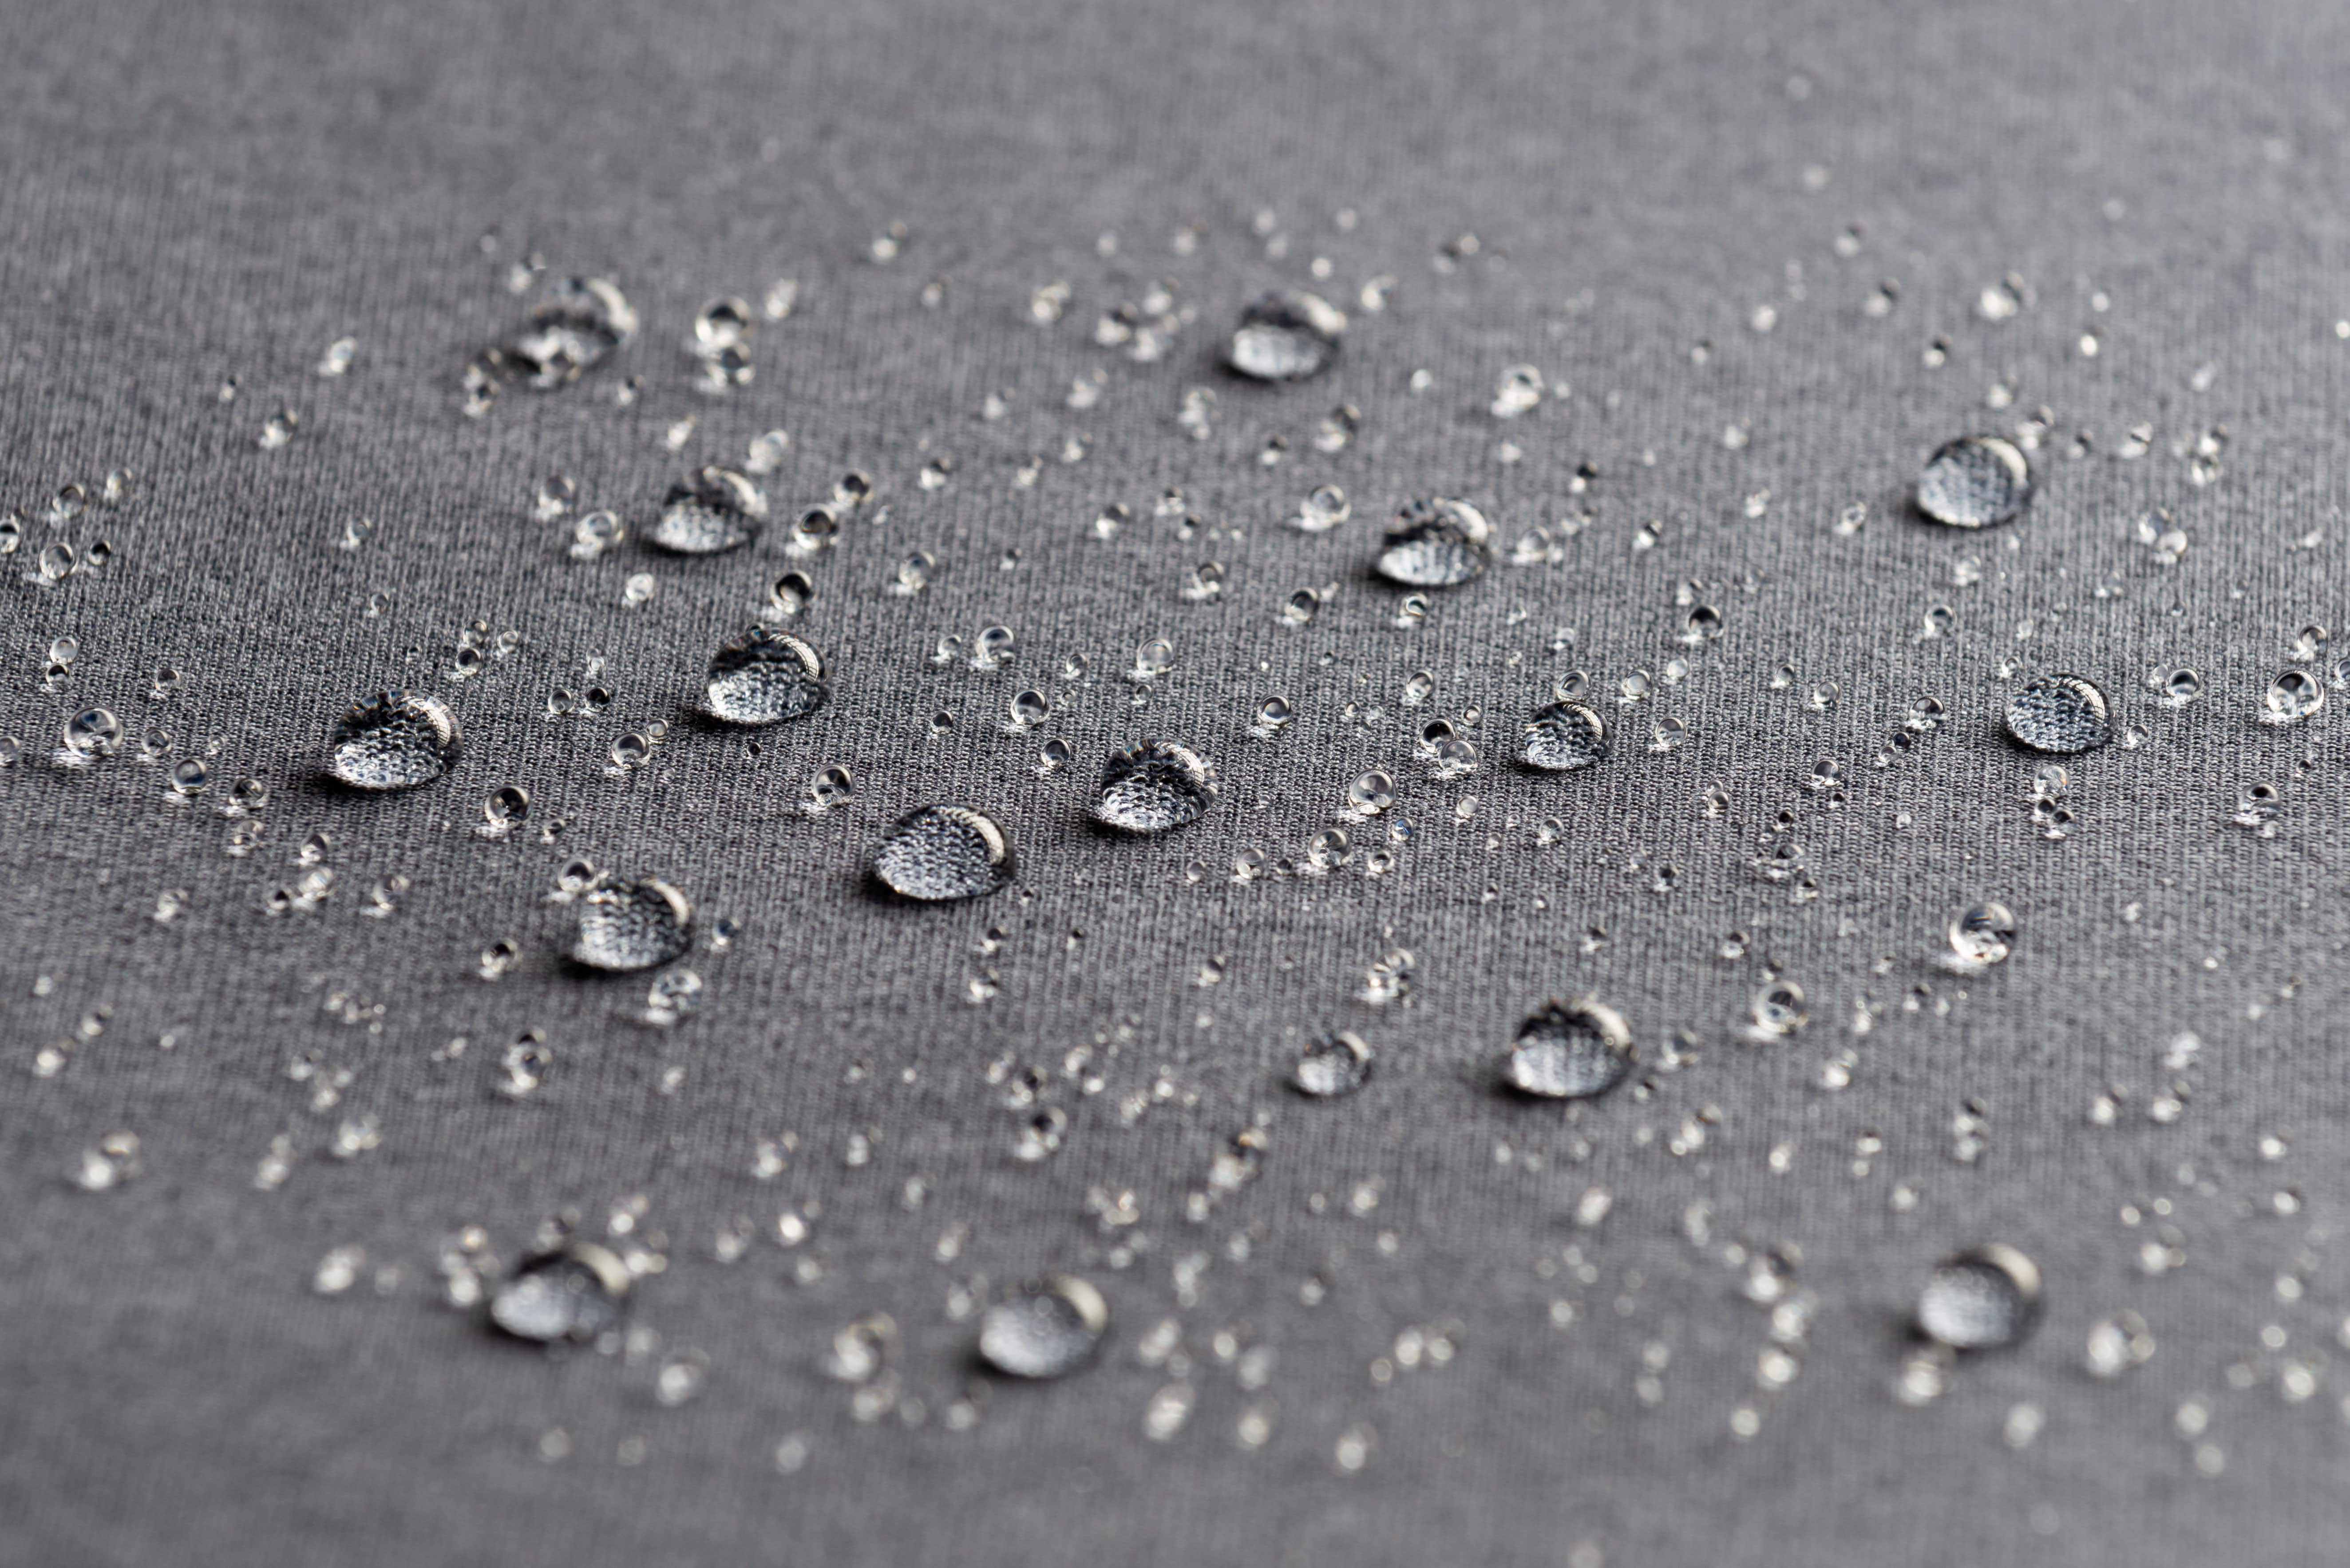 Water droplets on Kinetic fabric